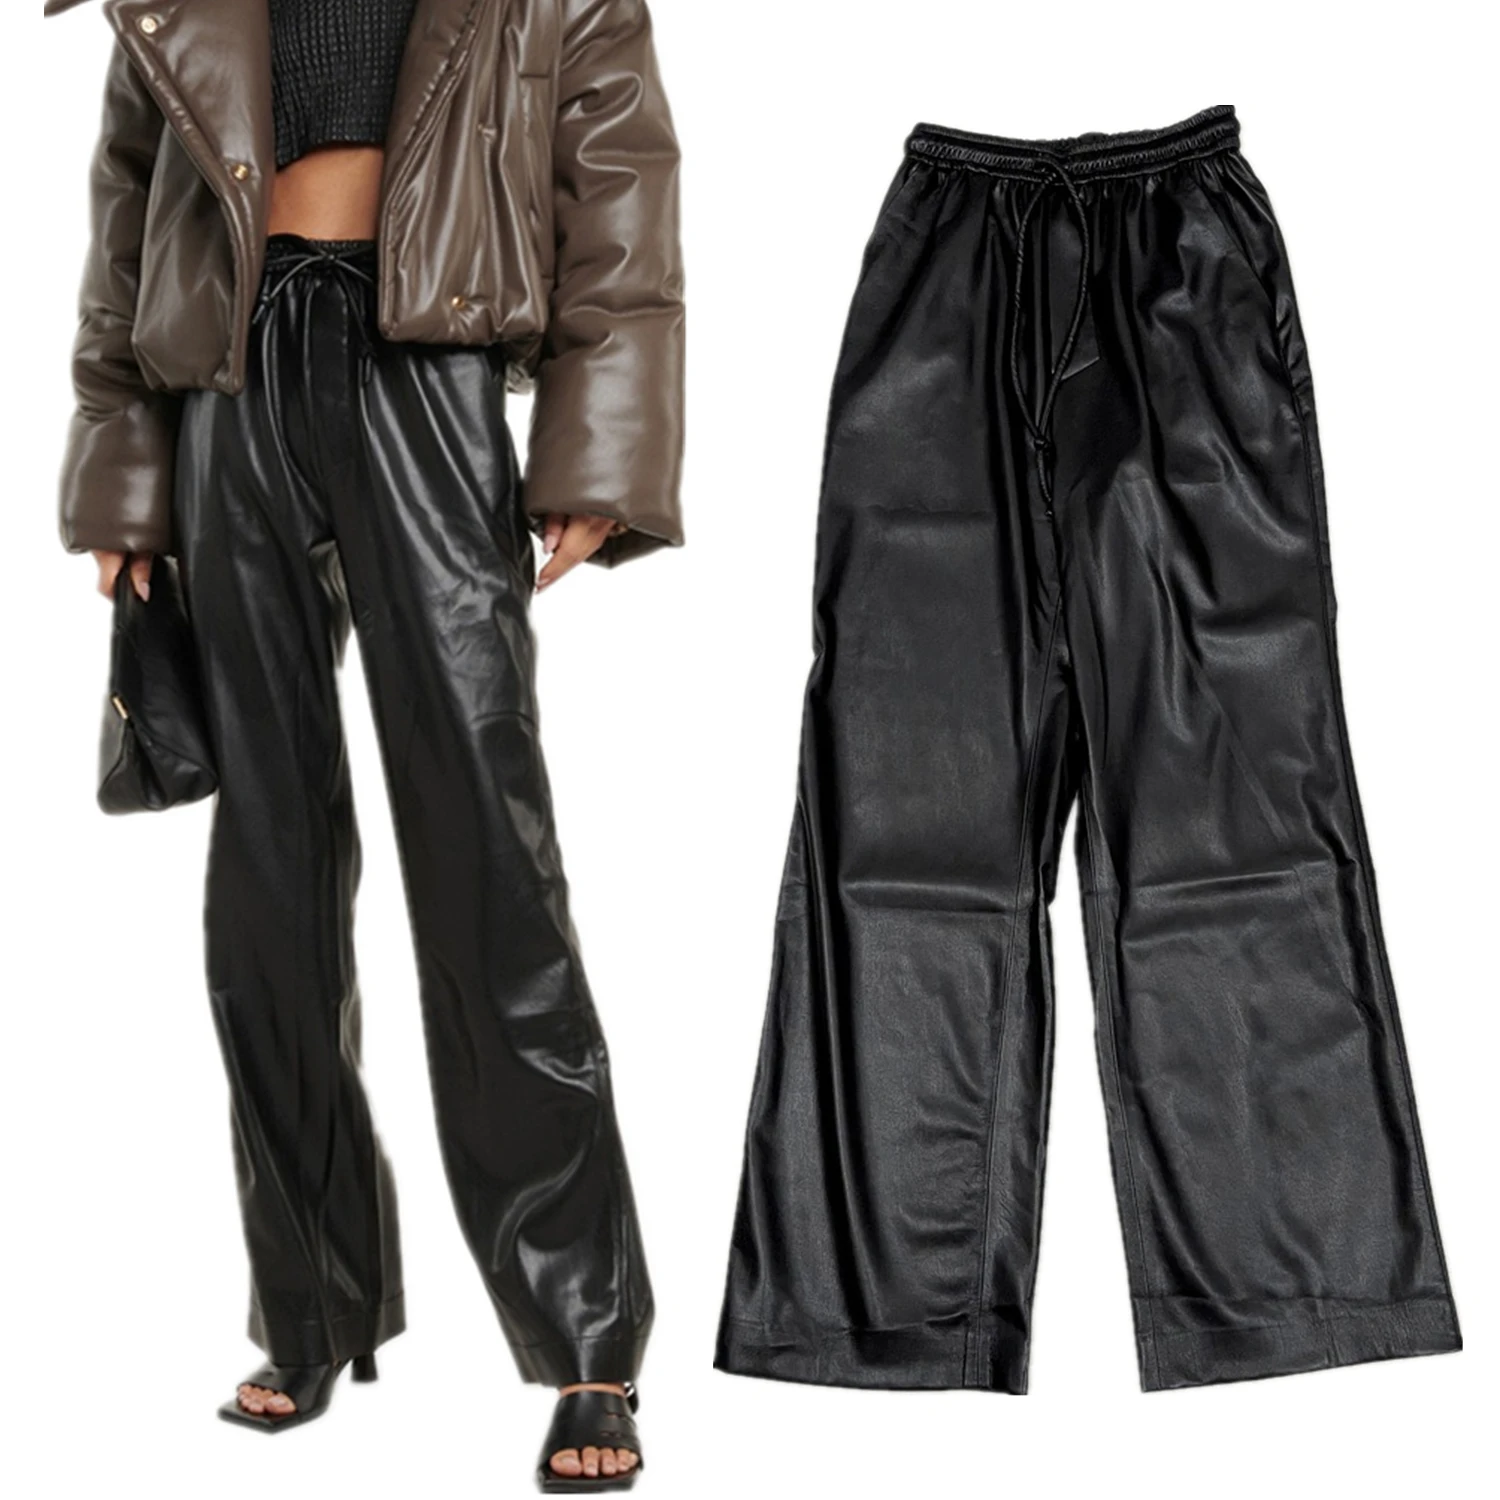 Withered Environmental Protection Leather Casual Pants High Street Fashion Retro Drawstring Loose Harem Leather Pants Women